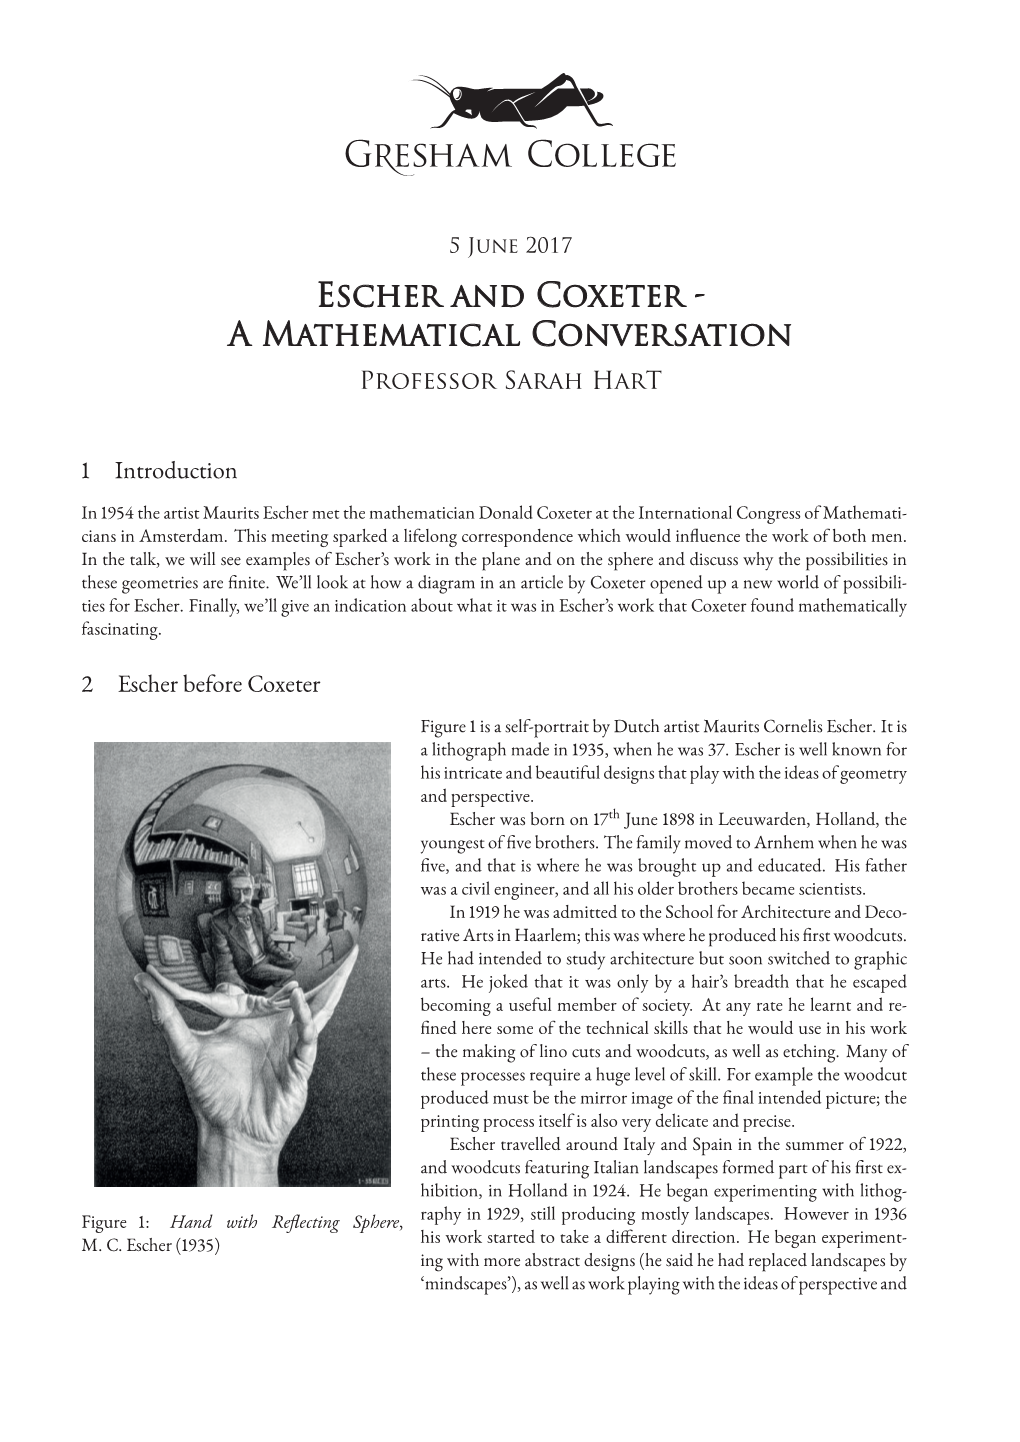 Escher and Coxeter Special Is That There Was a Genuine Exchange of Ideas